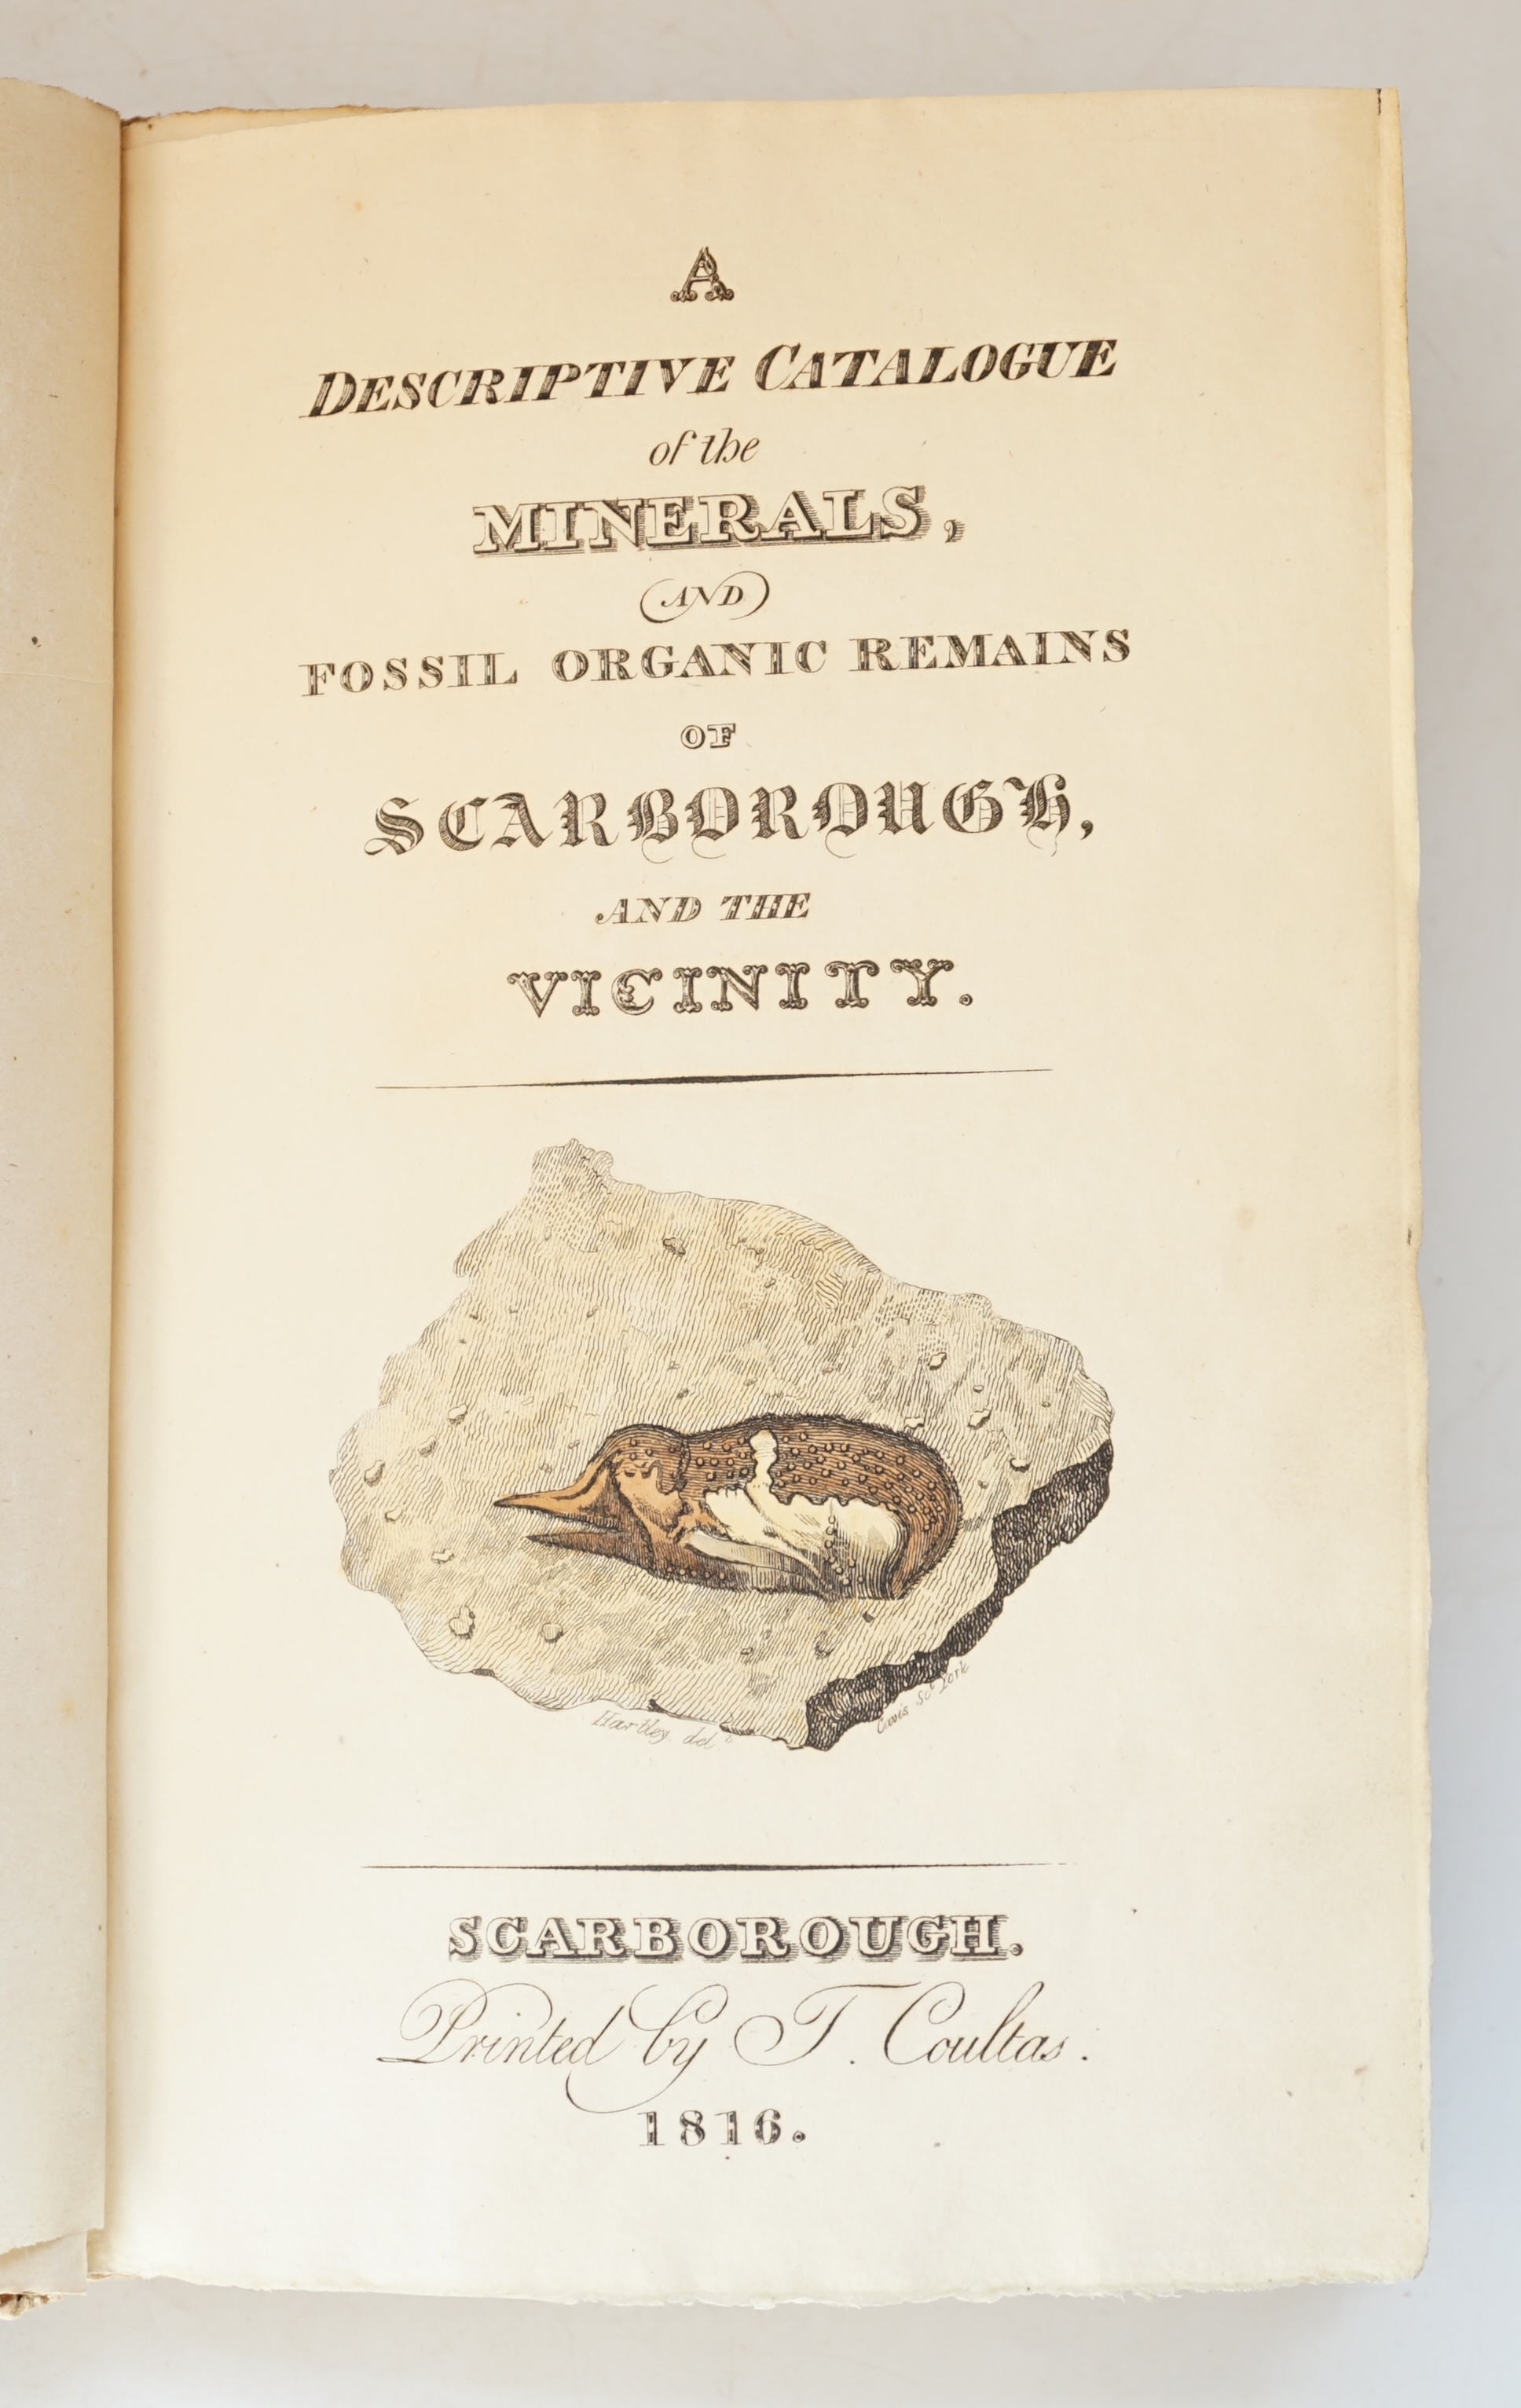 [Kendall, Frederick]. A Descriptive Catalogue of the Minerals, and Fossil Organic Remains of Scarborough and the Vicinity, including the line of Coast from Hornsea to Mulgrave, and Extending into the Interior as far as M